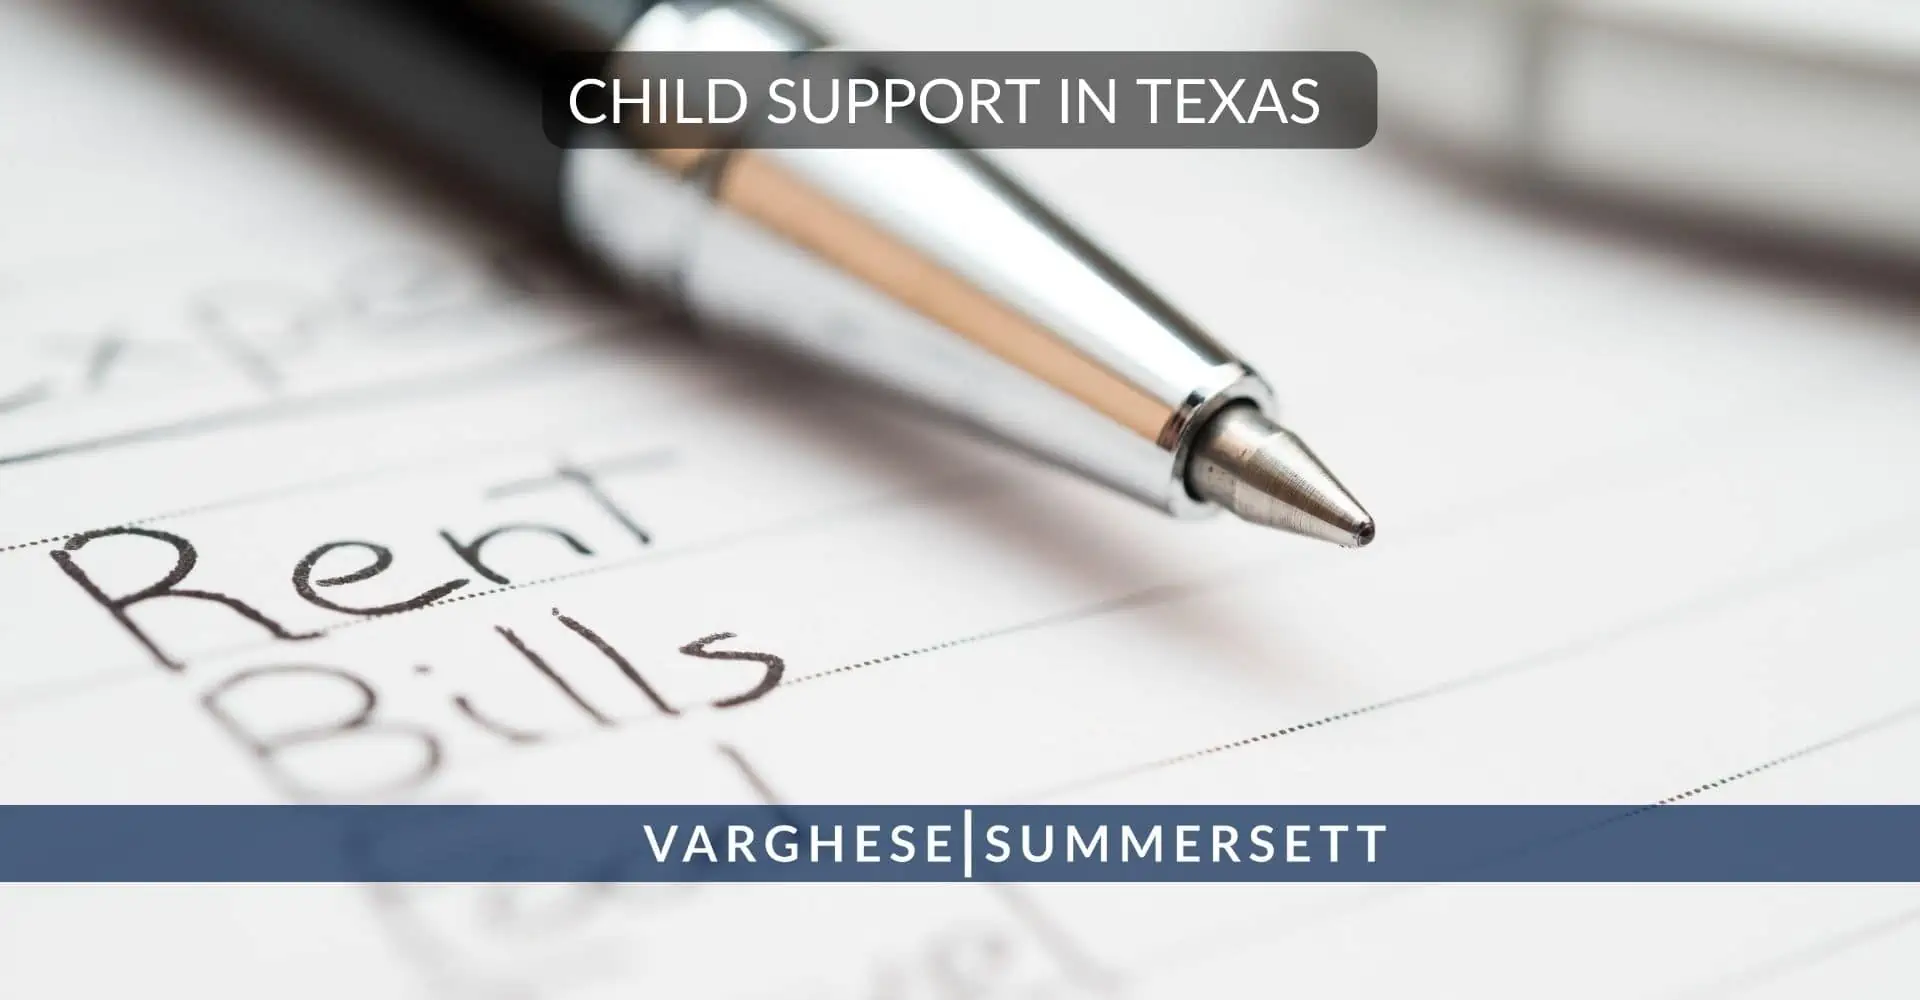 Child support in Texas